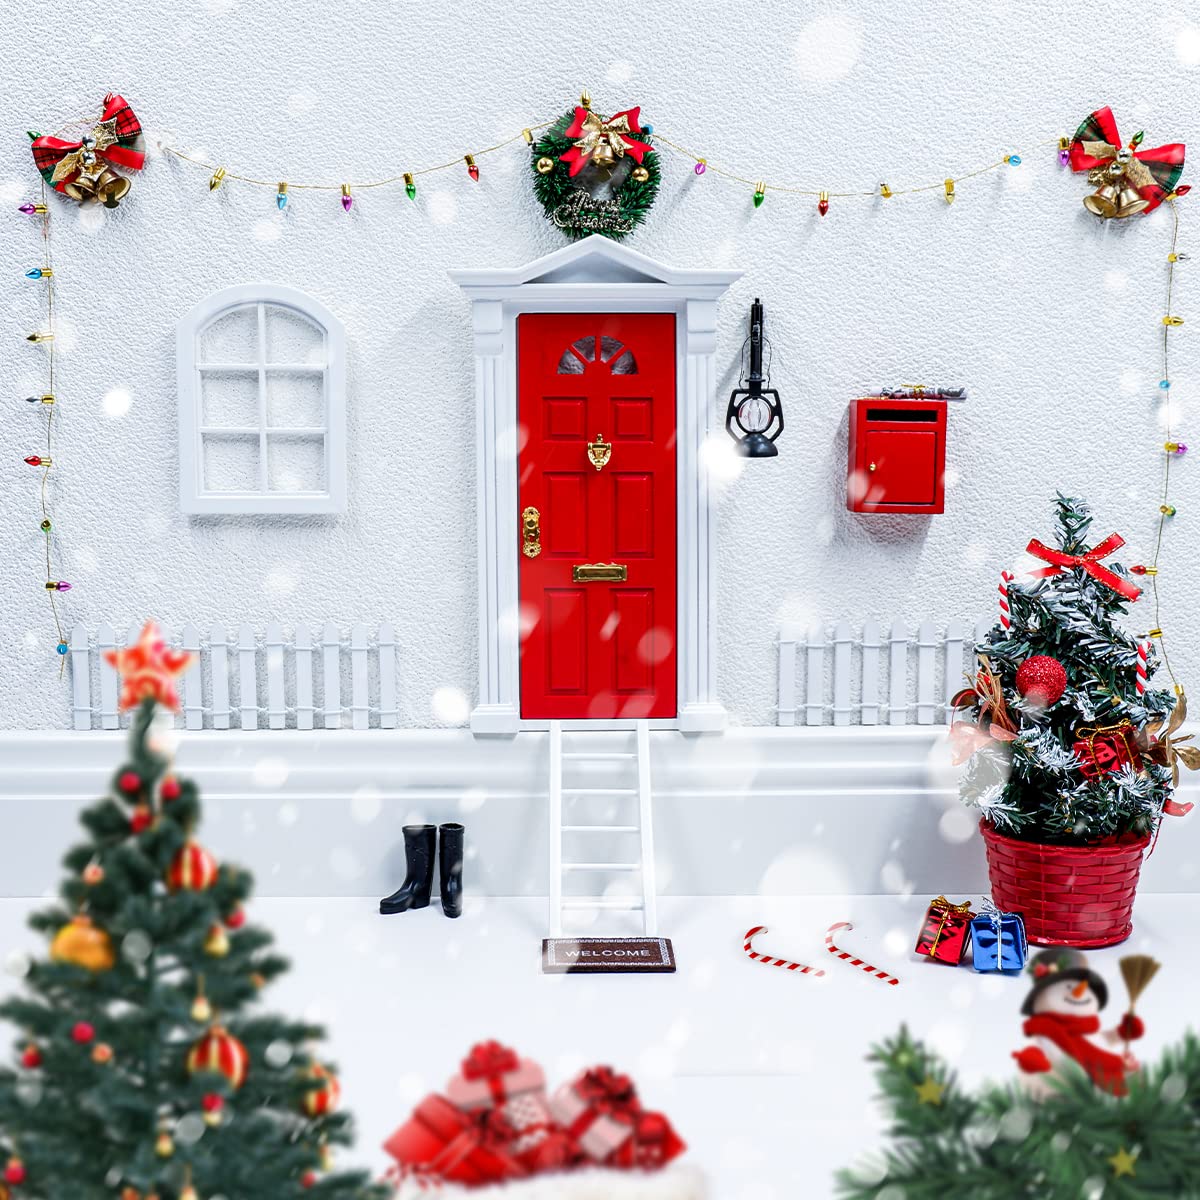 BEIREG Dollhouse Furniture - 22pcs Miniature Fairy Door with Light Strip Christmas Tree and Christmas Accesories, Christmas Decorations Wooden Fairy Door Craft Gift for Kids